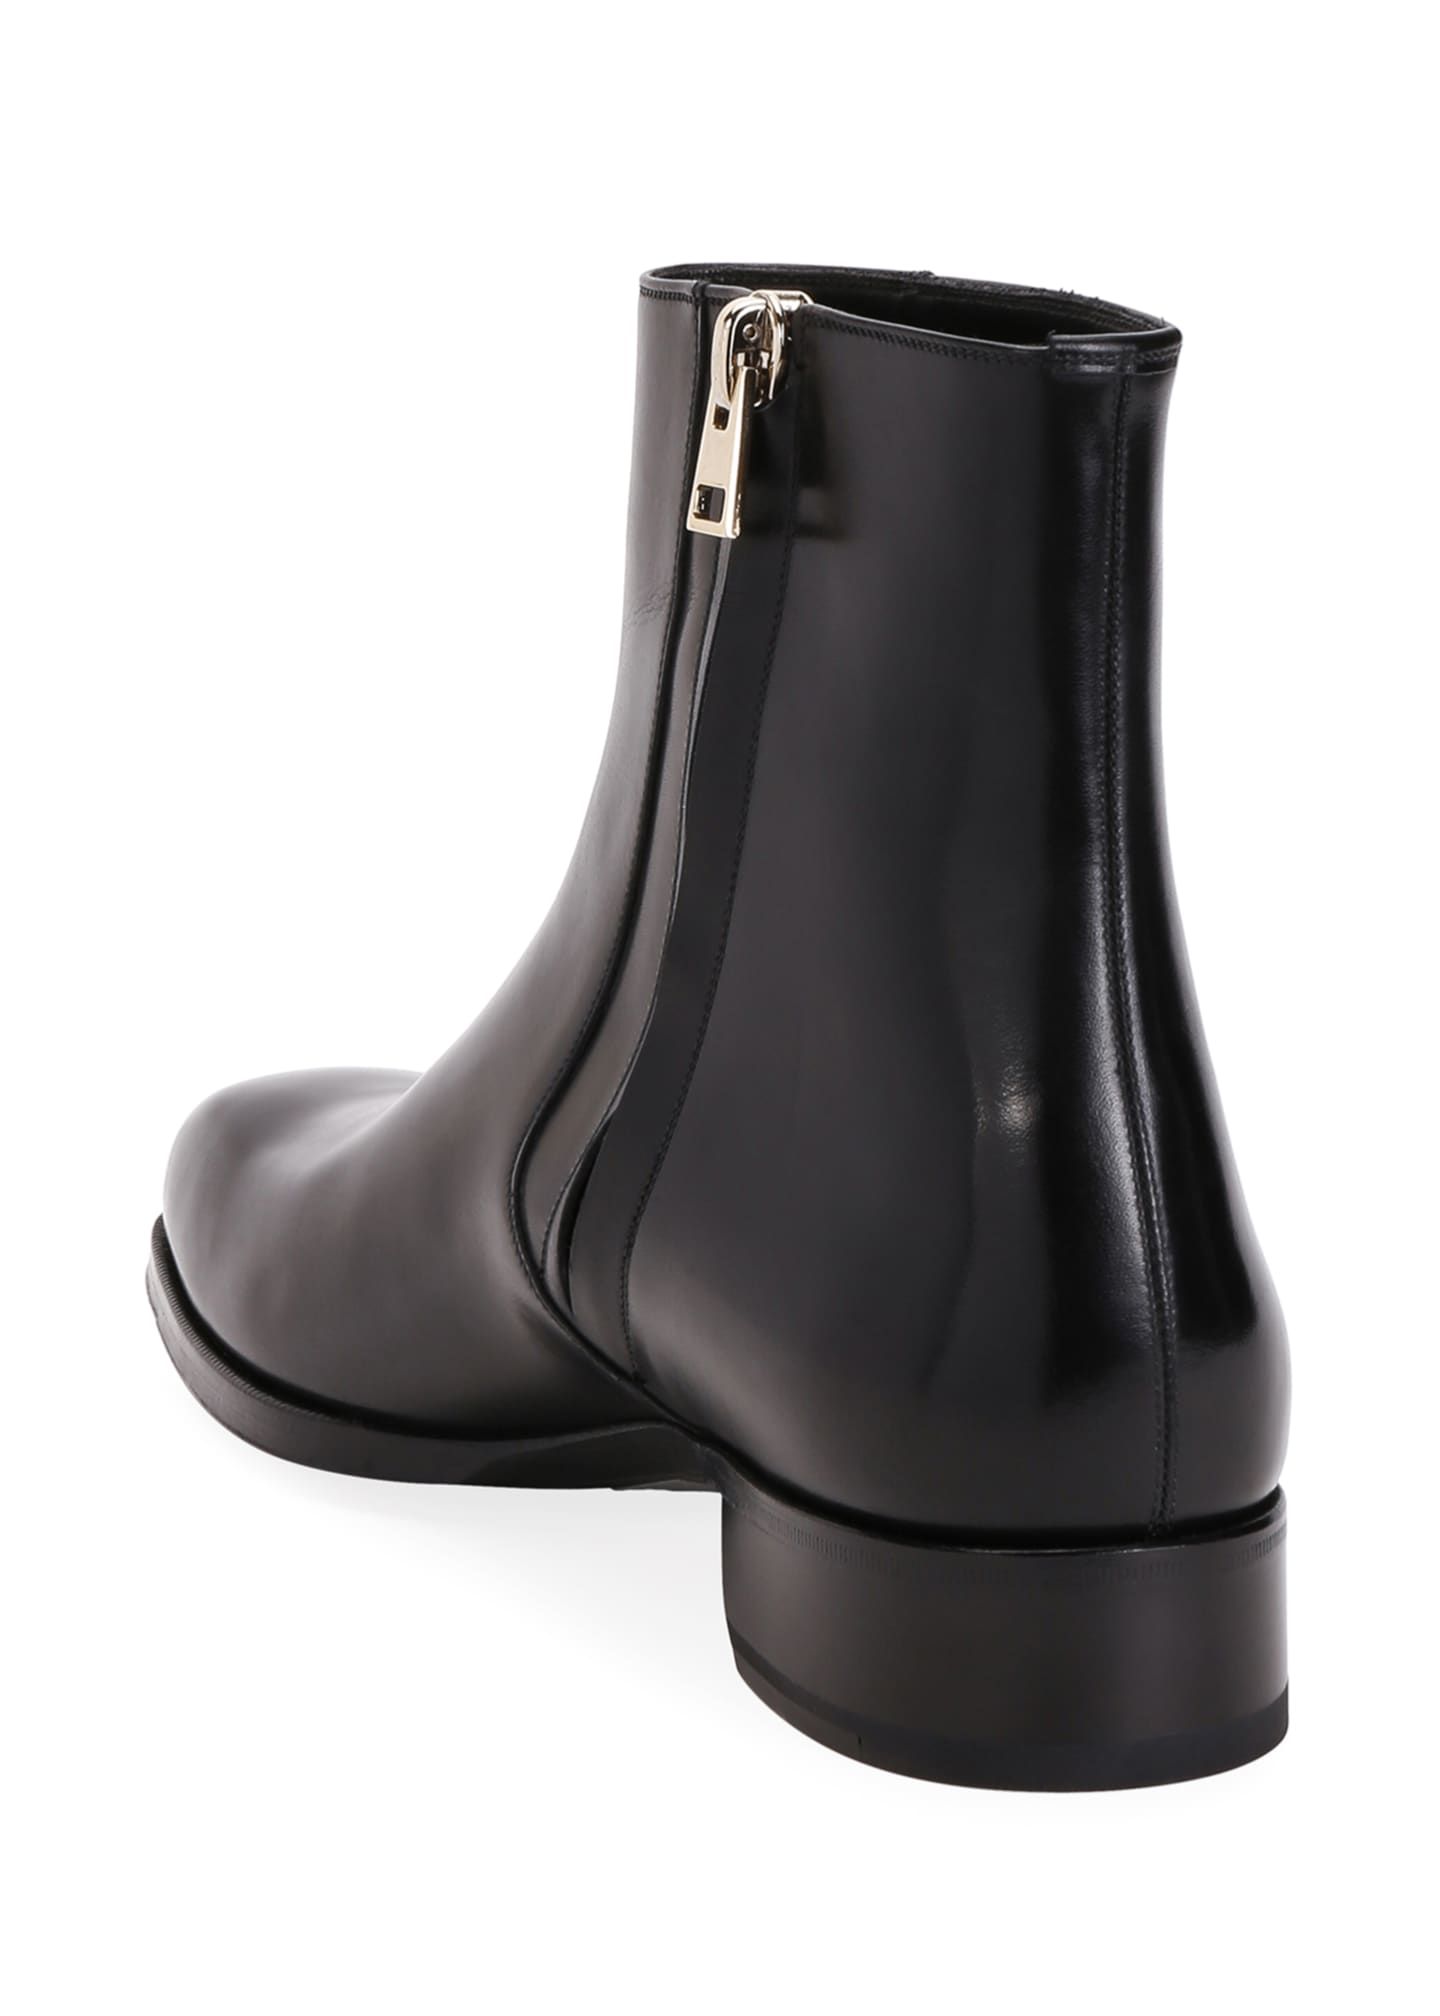 TOM FORD Men's Formal Leather Side-Zip Ankle Boots - Bergdorf Goodman